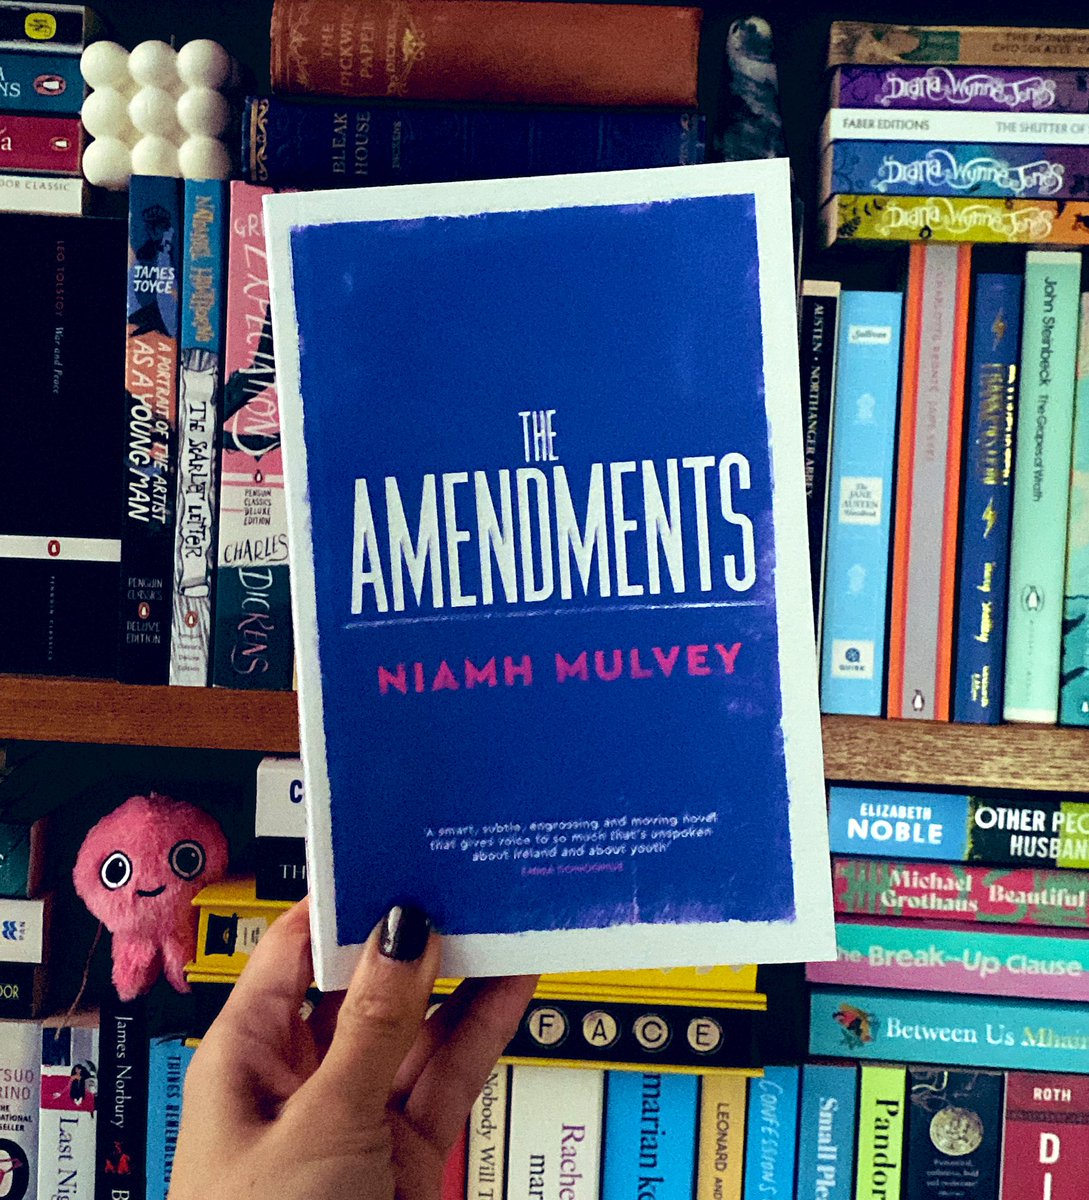 It gets dark so early 😱 Quickly jumping on here to say huge thanks to @siobhanslatt_ for this exciting proof of #TheAmendments @picadorbooks 

A sweeping family saga which tells the story of 3 Irish women and their struggles to find love, meaning and freedom

#BookTwitter